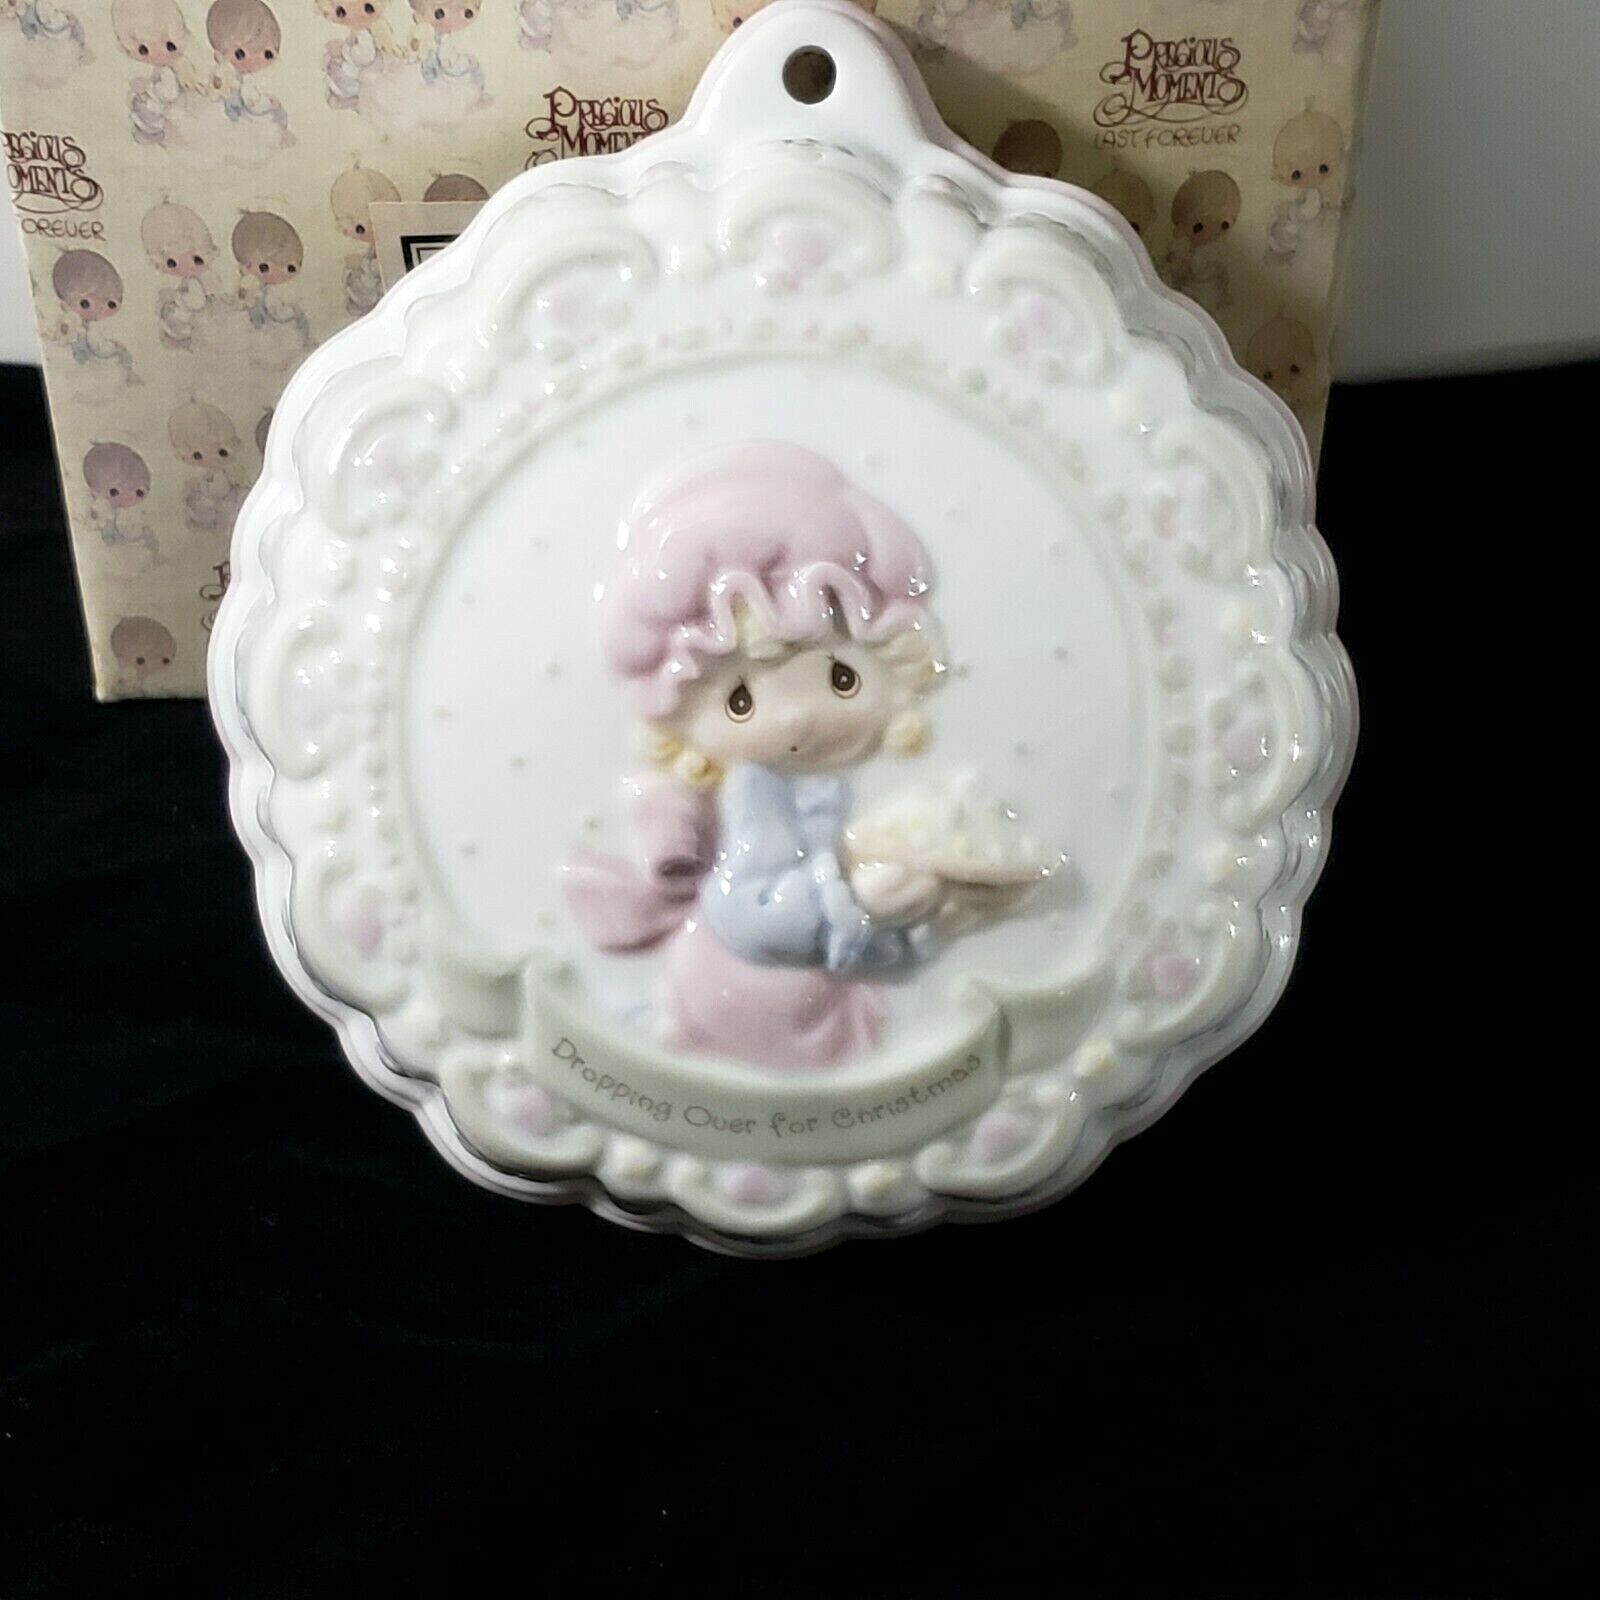 RETIRED PRECIOUS MOMENTS GIRL PIE KITCHEN MOLD DROPPING OVER FOR CHRISTMAS  BOX